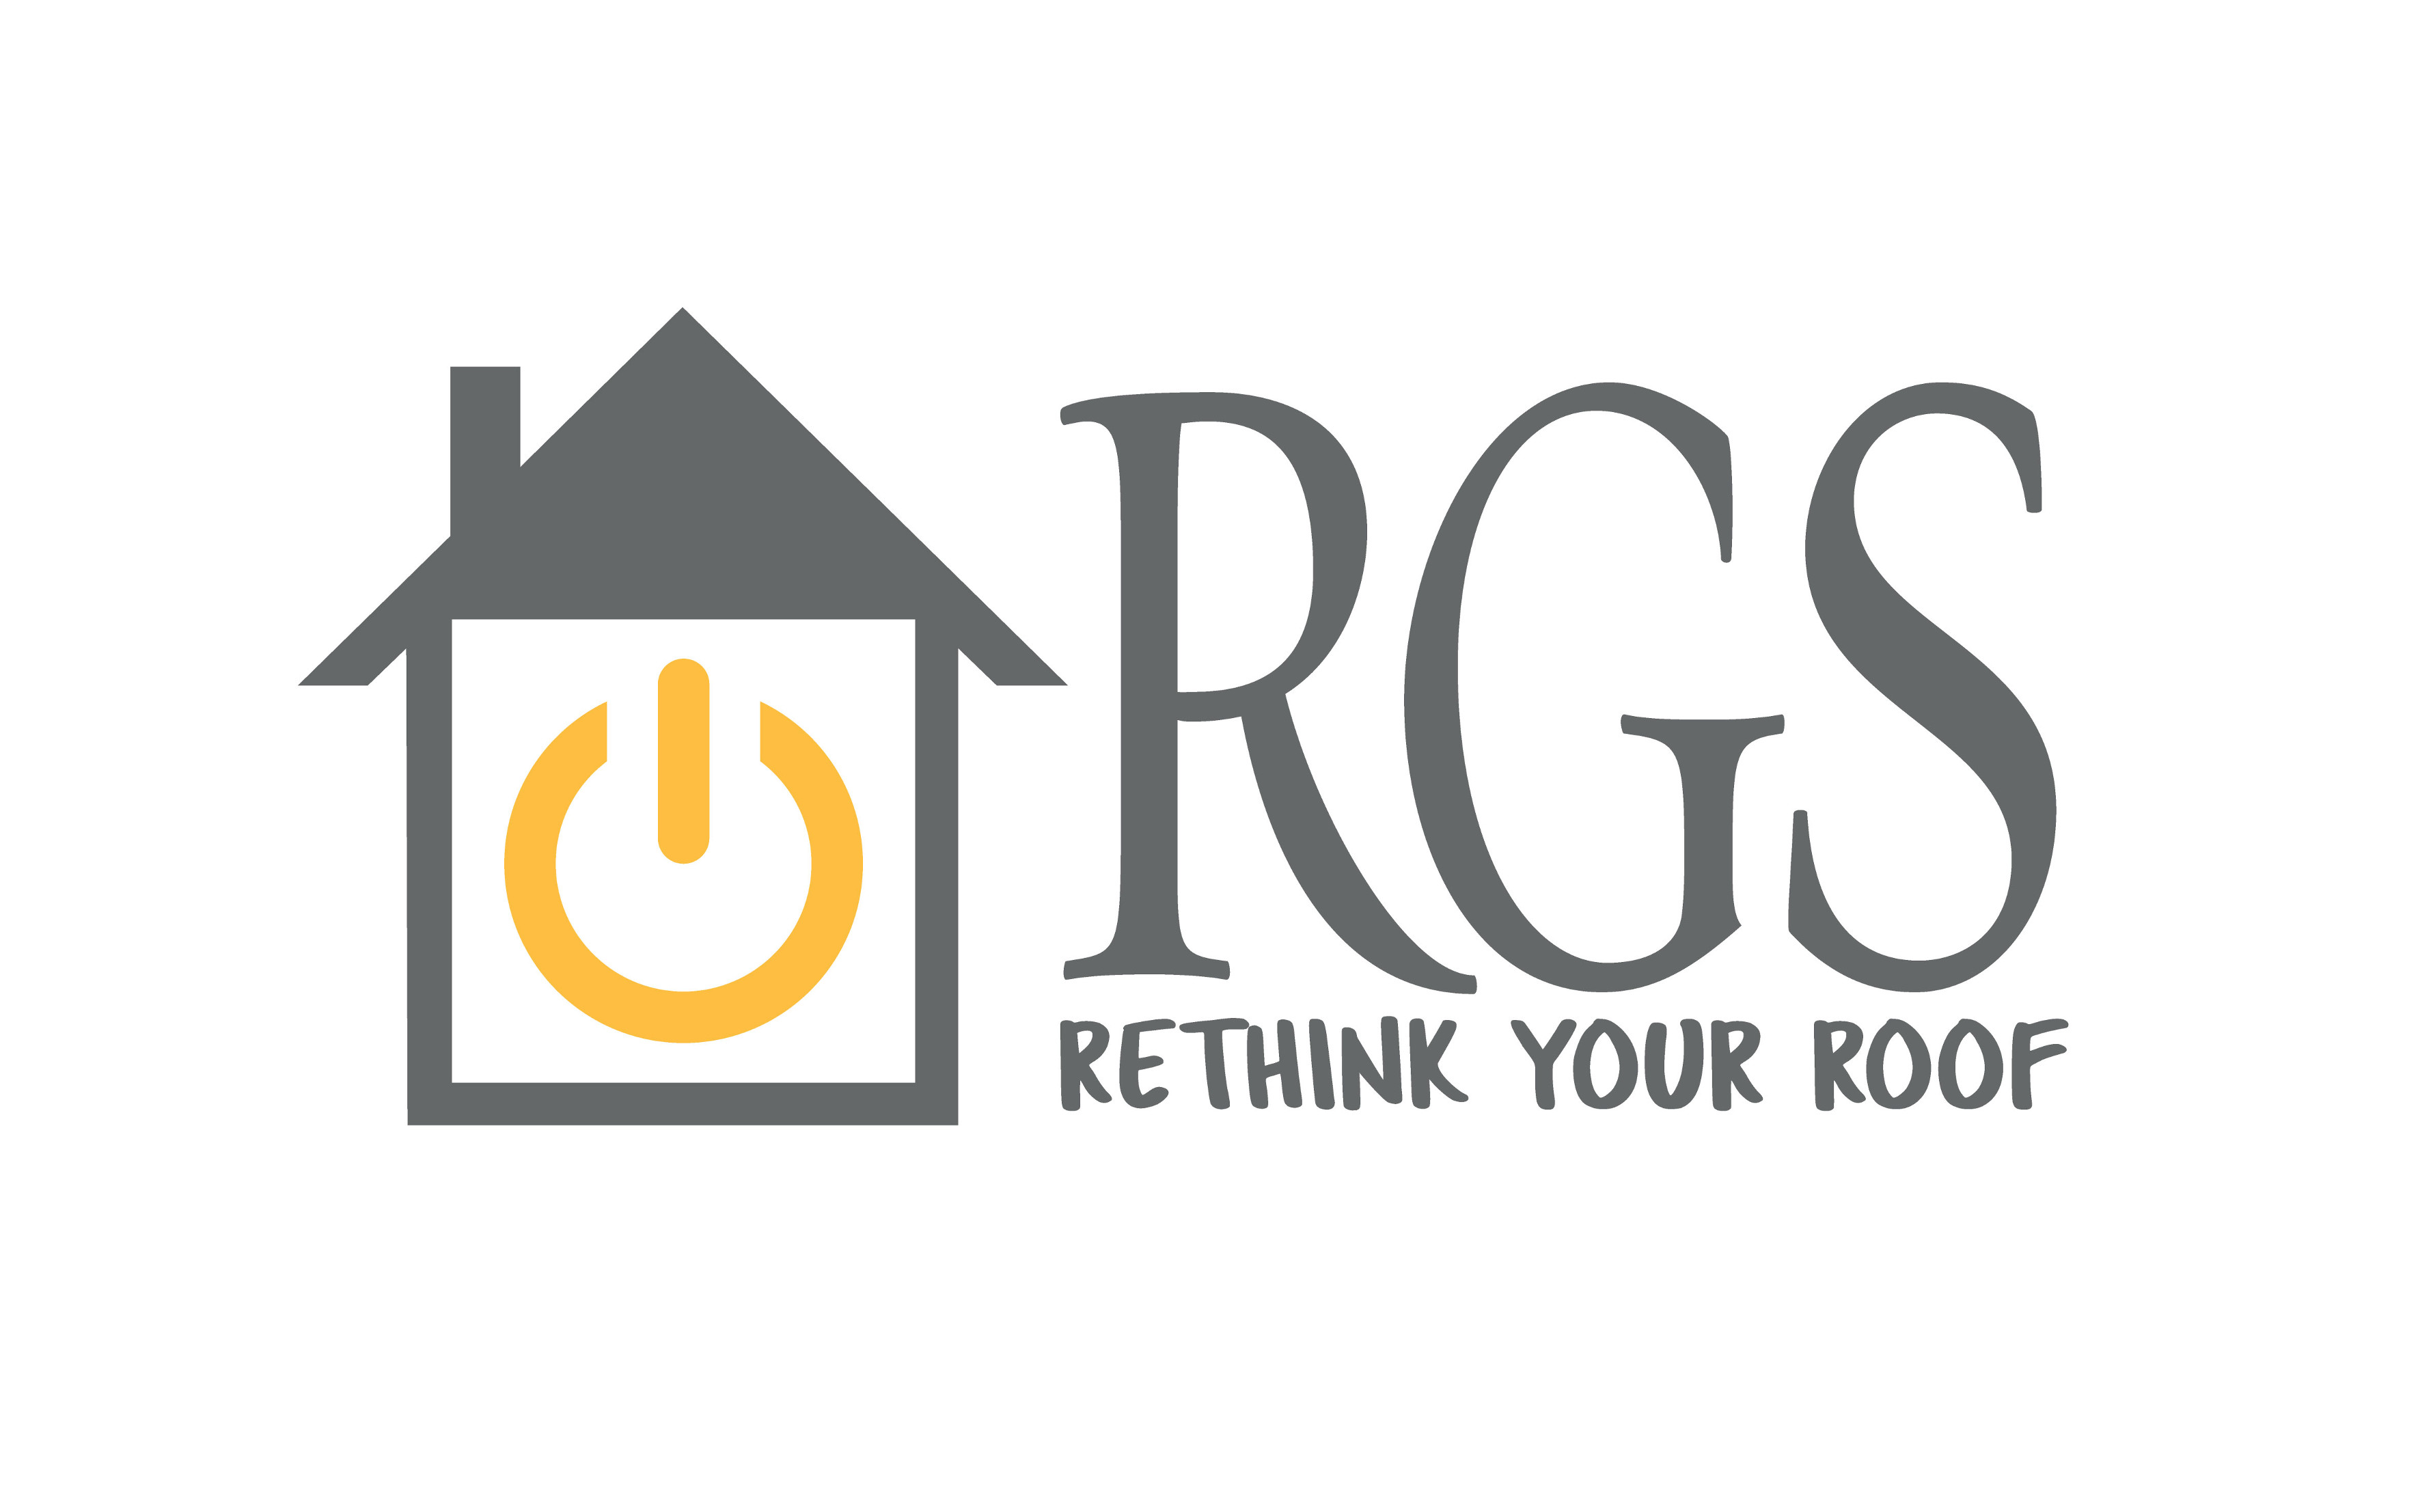 RGS_rethink_your_roof_logo_outlined.jpg